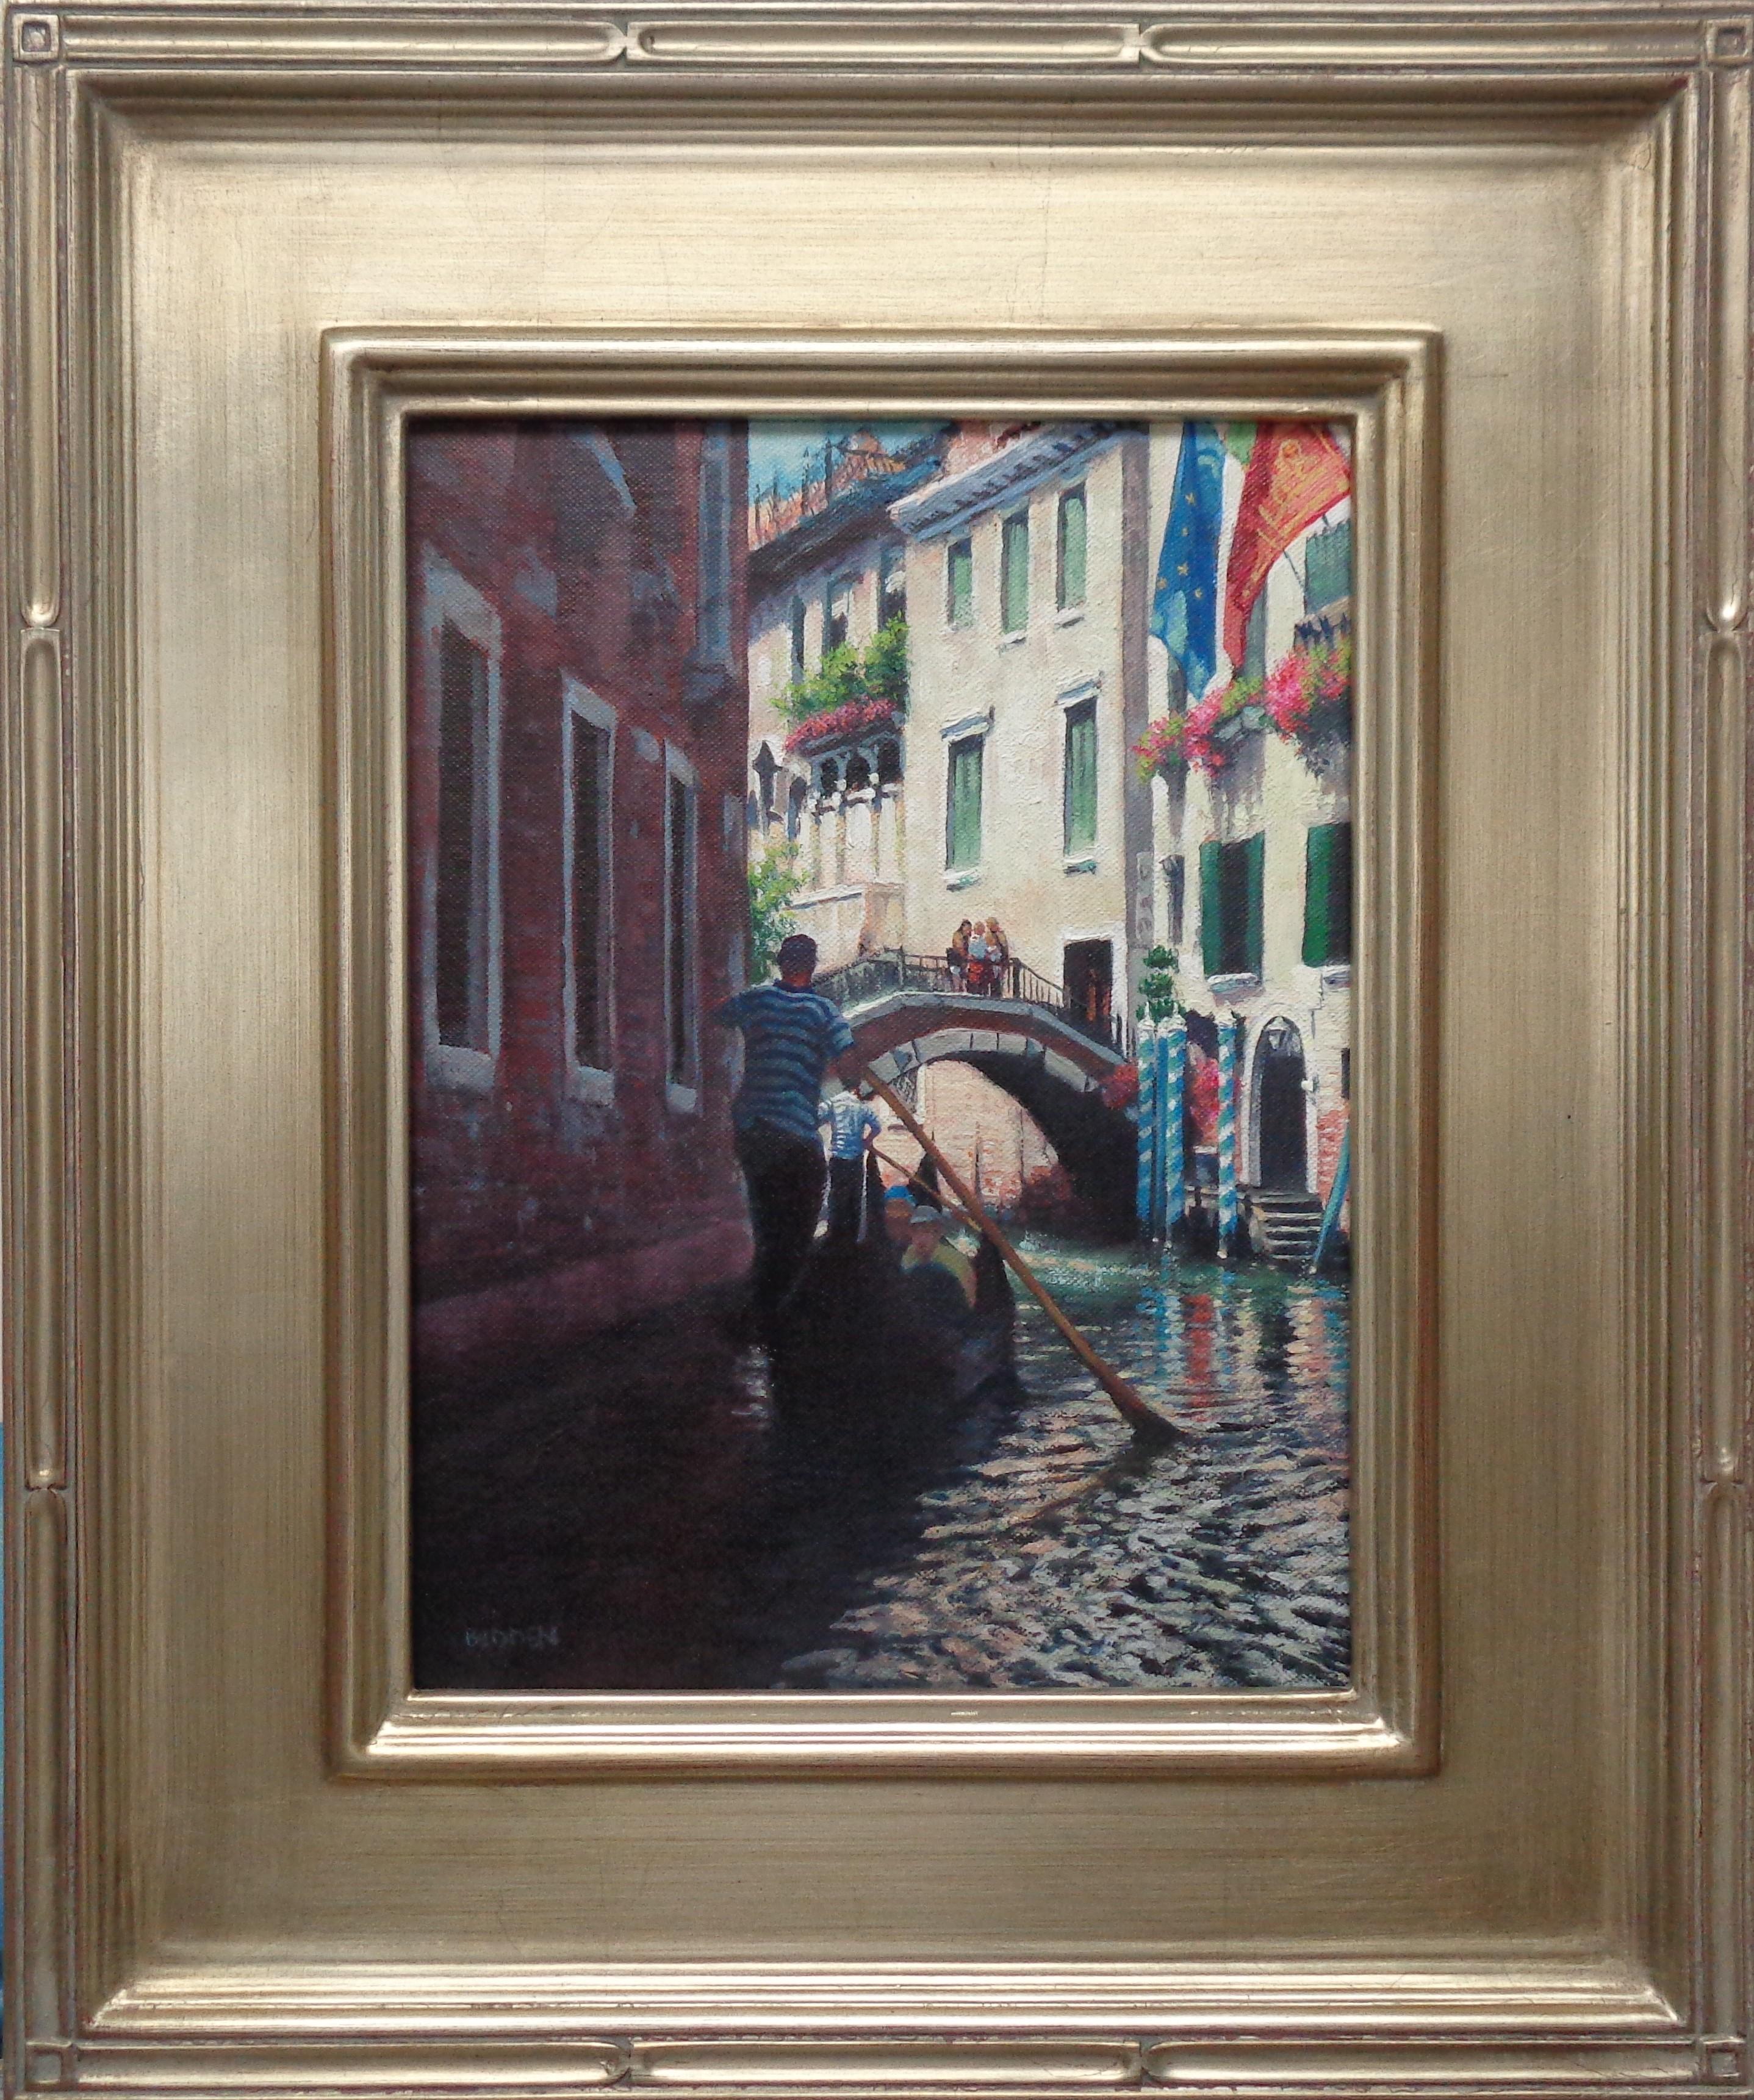 Sunlit Voyage, Gondoliers, Venice is a beautiful  oil painting on canvas panel by award winning contemporary artist Michael Budden that showcases a pair of gondoliers heading through the shadows with the sunlight hitting the buildings as they